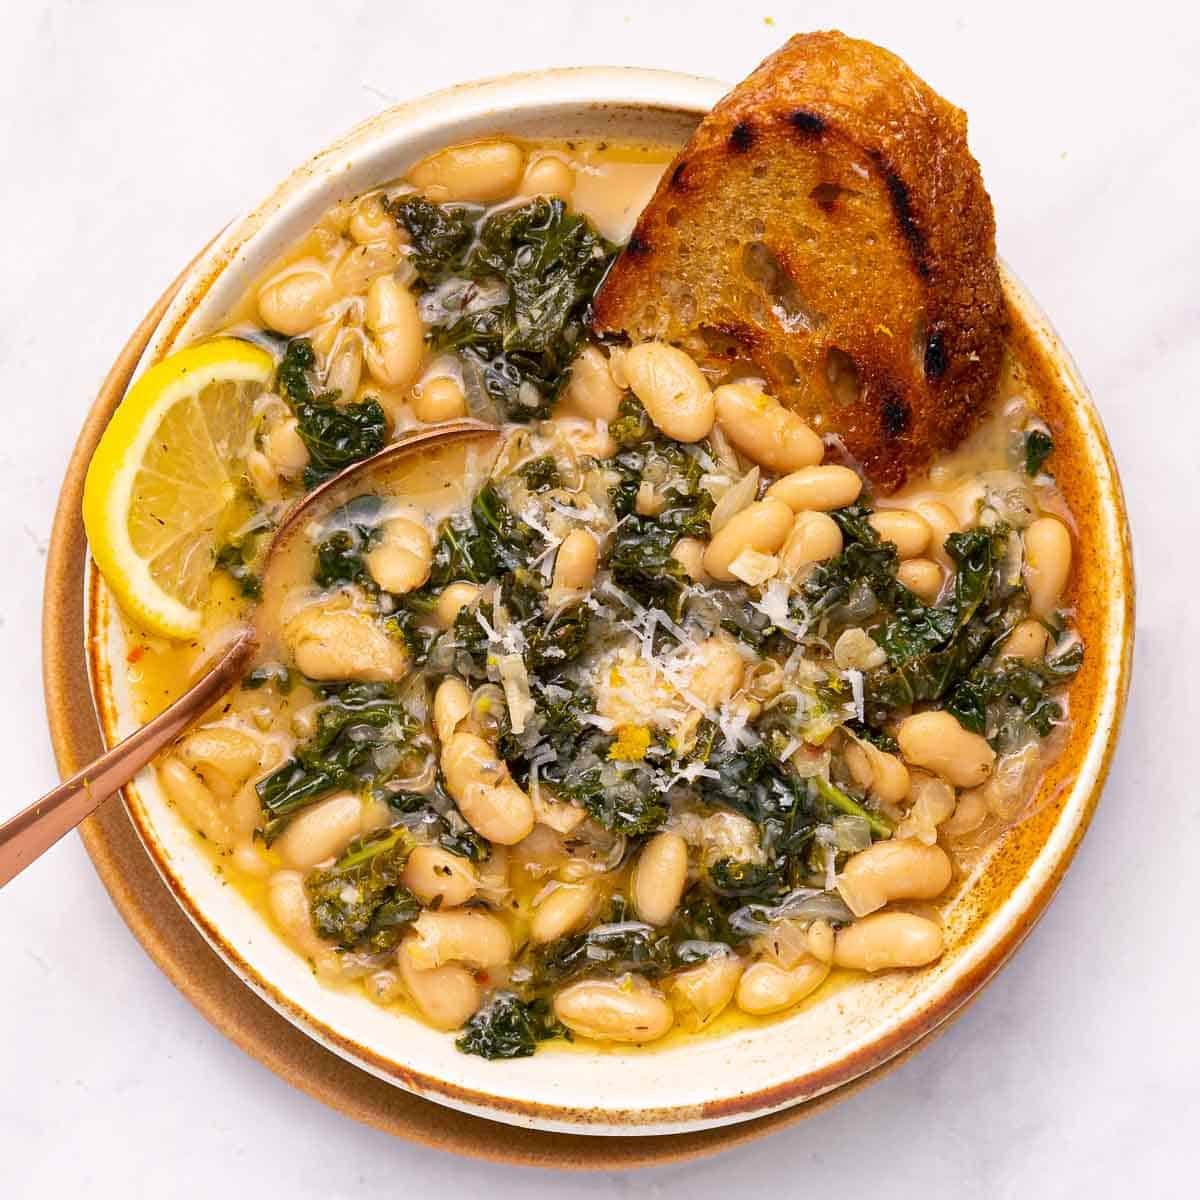 a bowl of braised white beans & greens with a slice of lemon and a piece of toast.